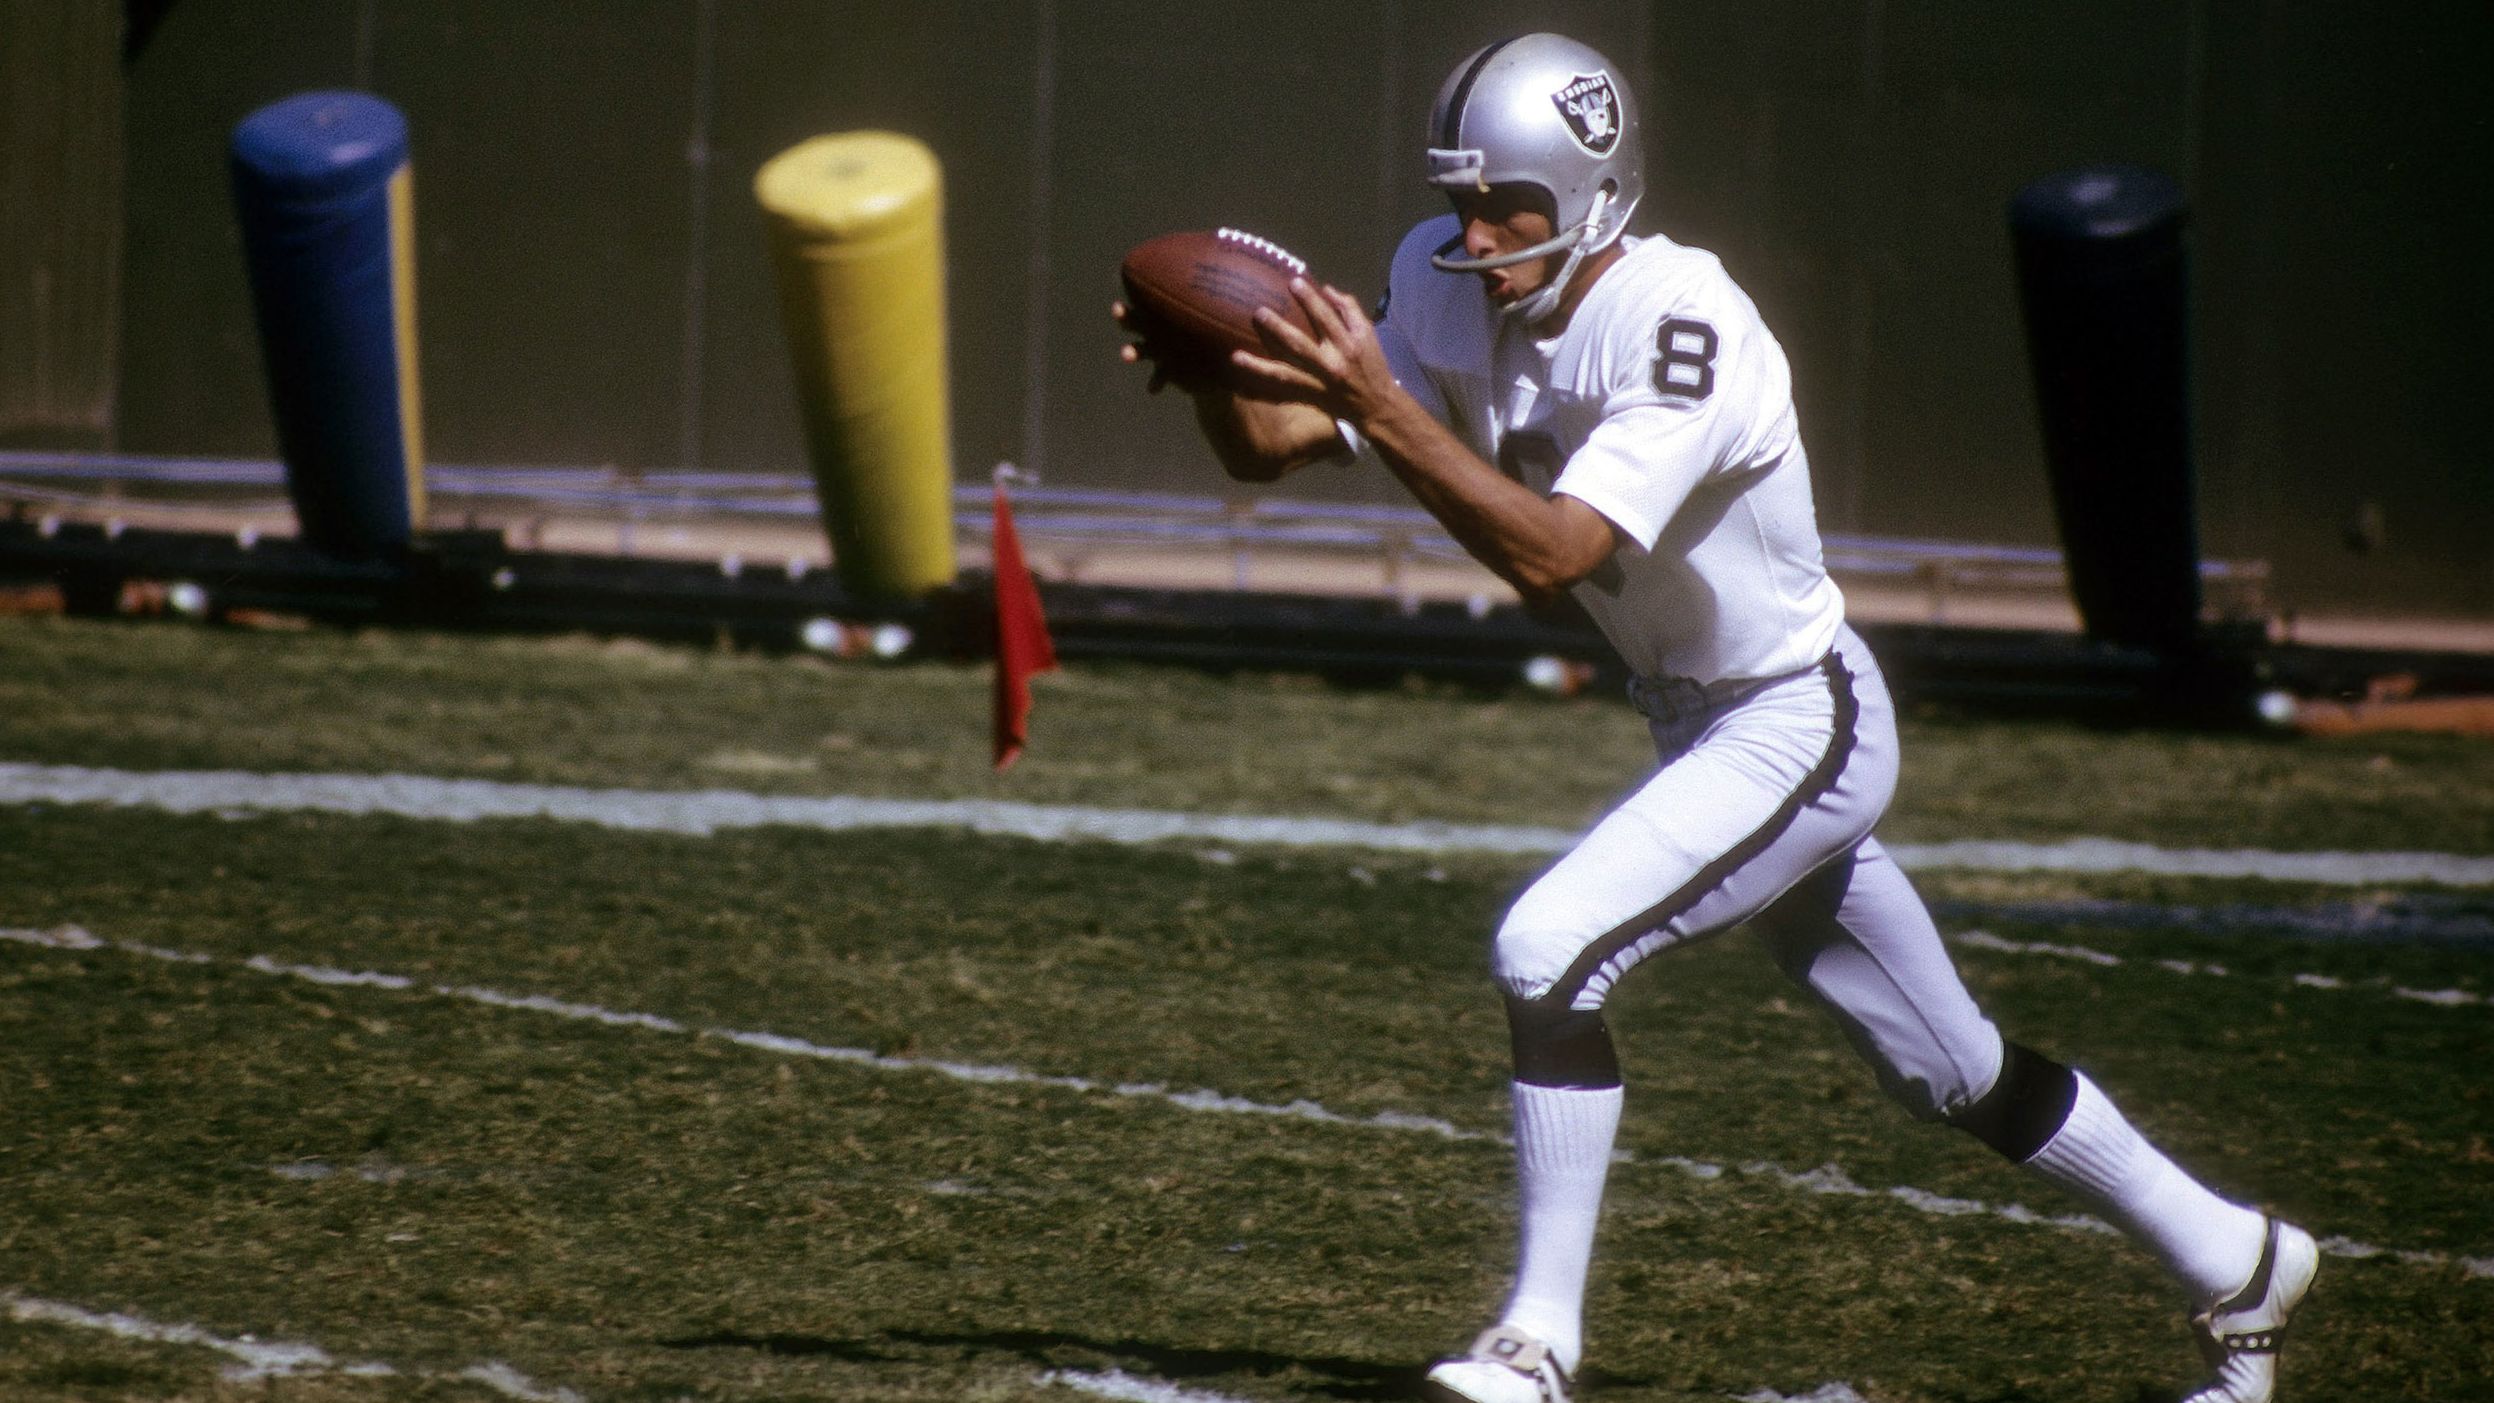 Hall of Fame football player <a href="https://www.cnn.com/2022/11/03/sport/ray-guy-nfl-punter-obituary" target="_blank">Ray Guy,</a> considered by many to be the greatest punter of all time, died November 3 at the age of 72.